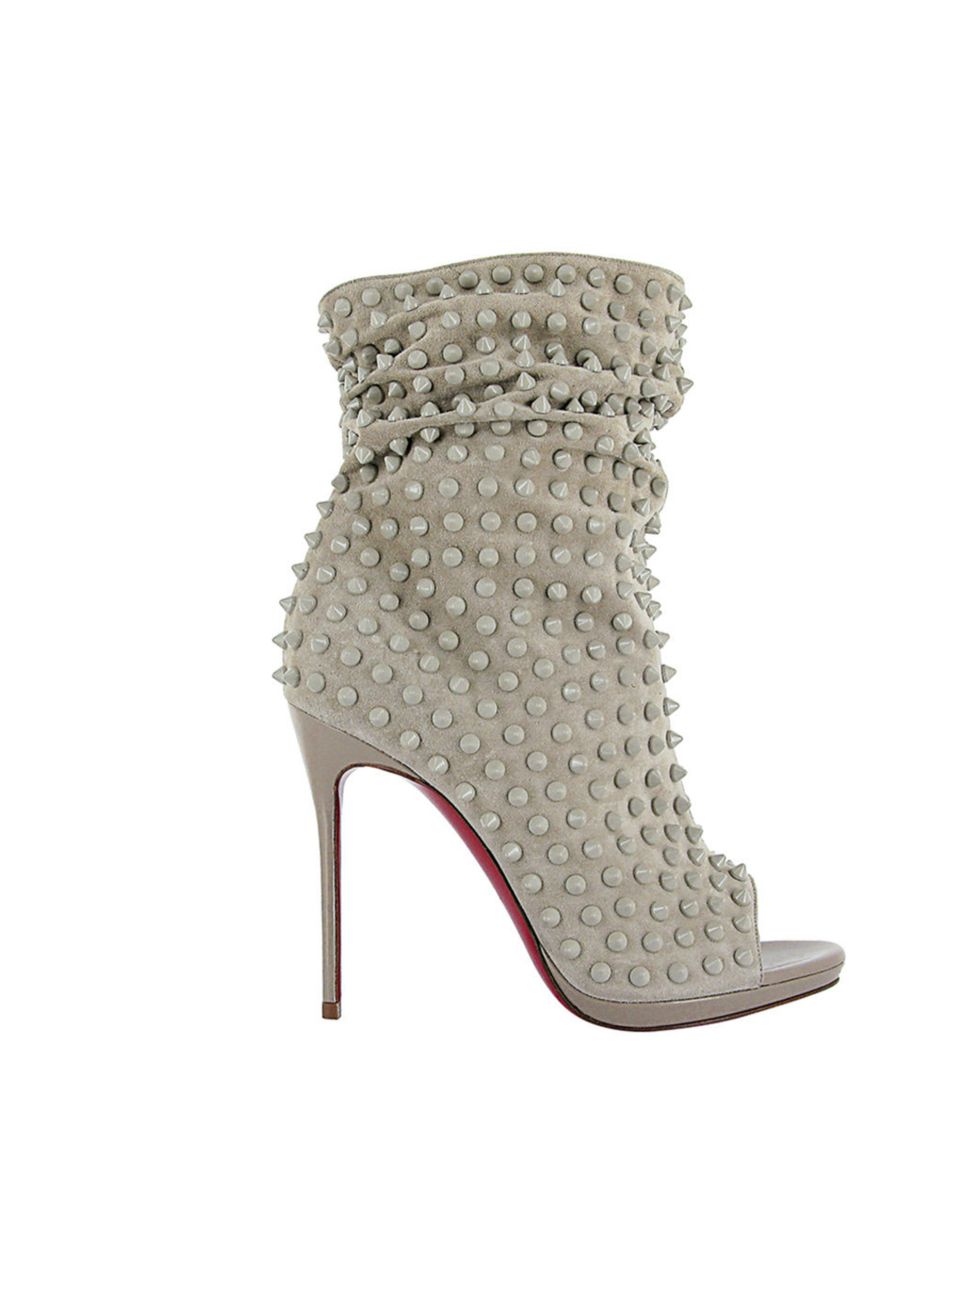 <p>Christian Louboutin Guerilla suede heels in stone, £1,235</p>